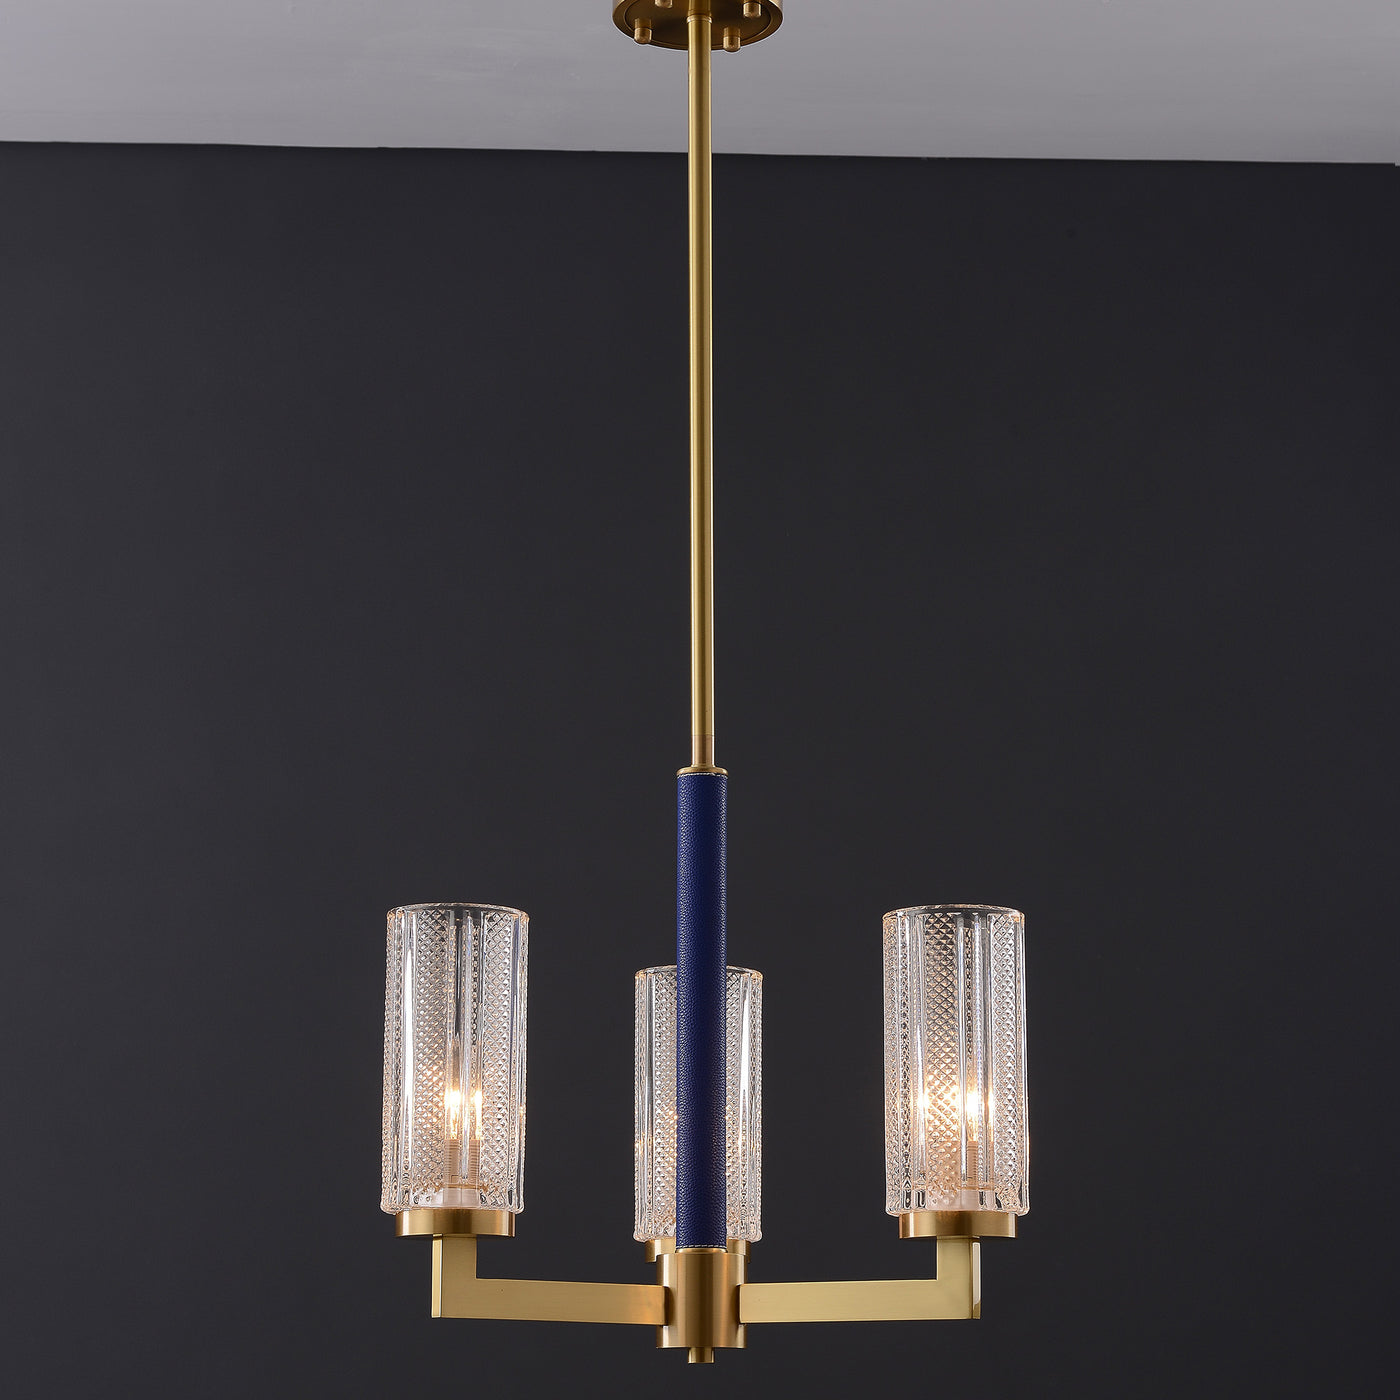 Blue Leather glass chandelier